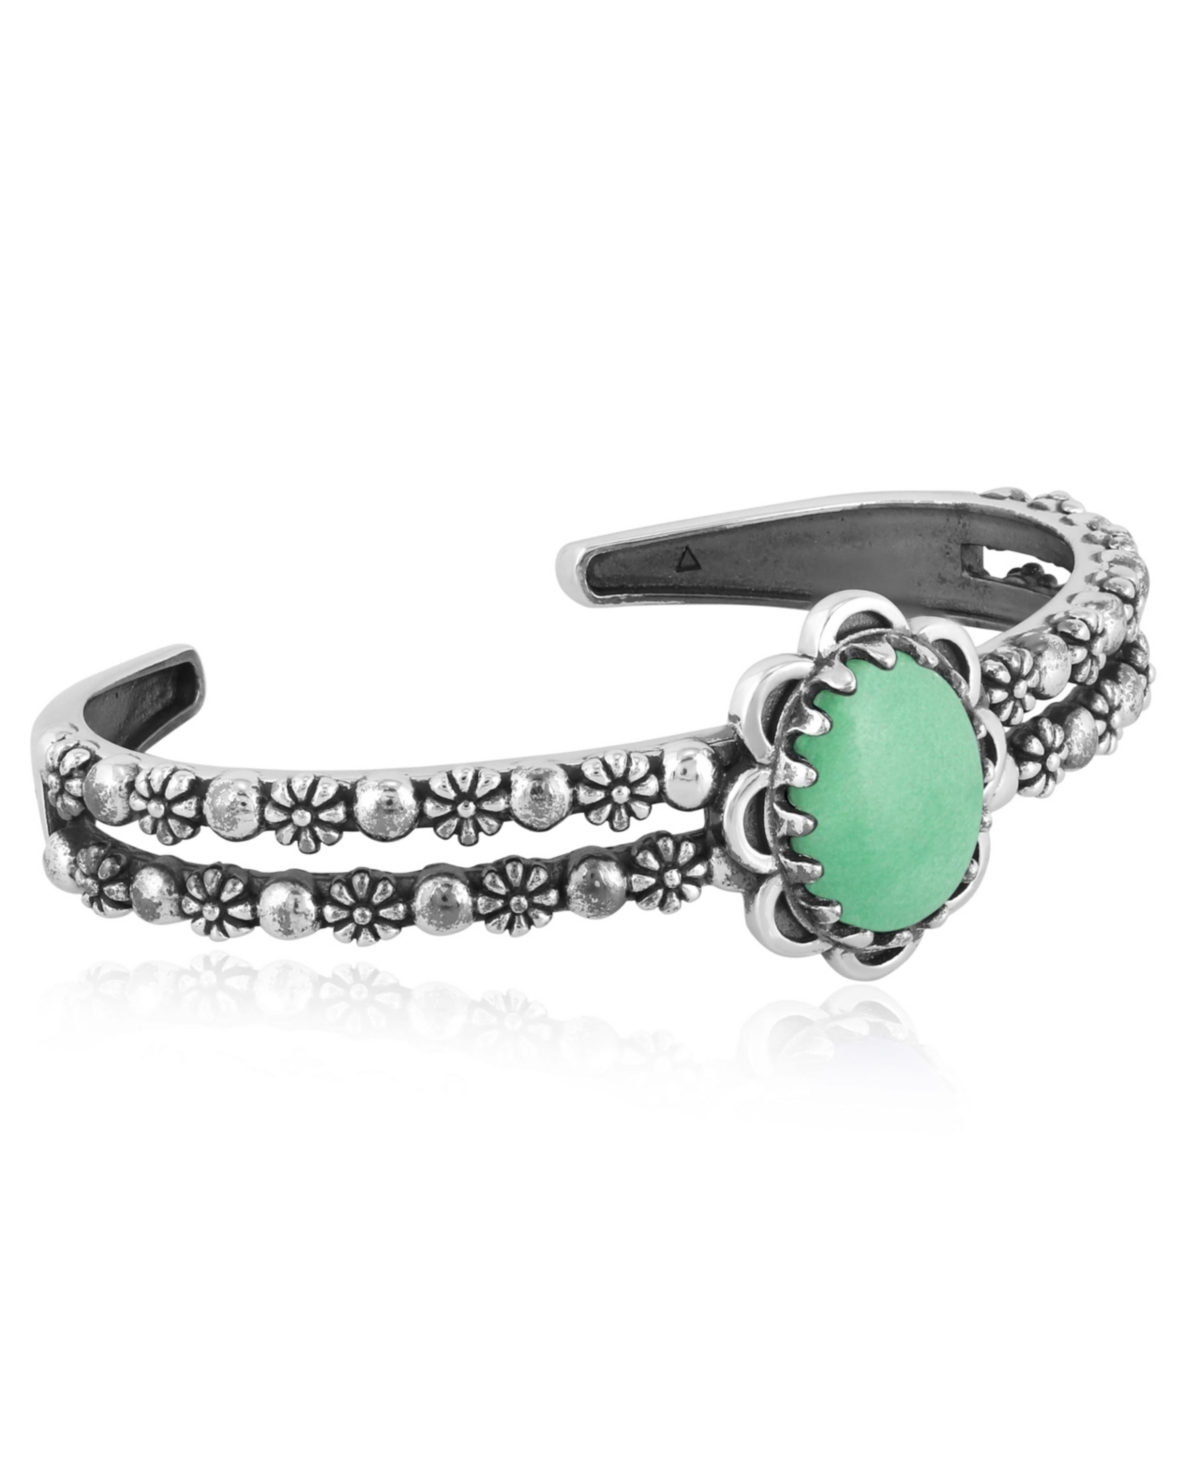 Southwestern Green Variscite Sterling Silver Double Row Cuff Bracelet, Size Small - Large - Green variscite